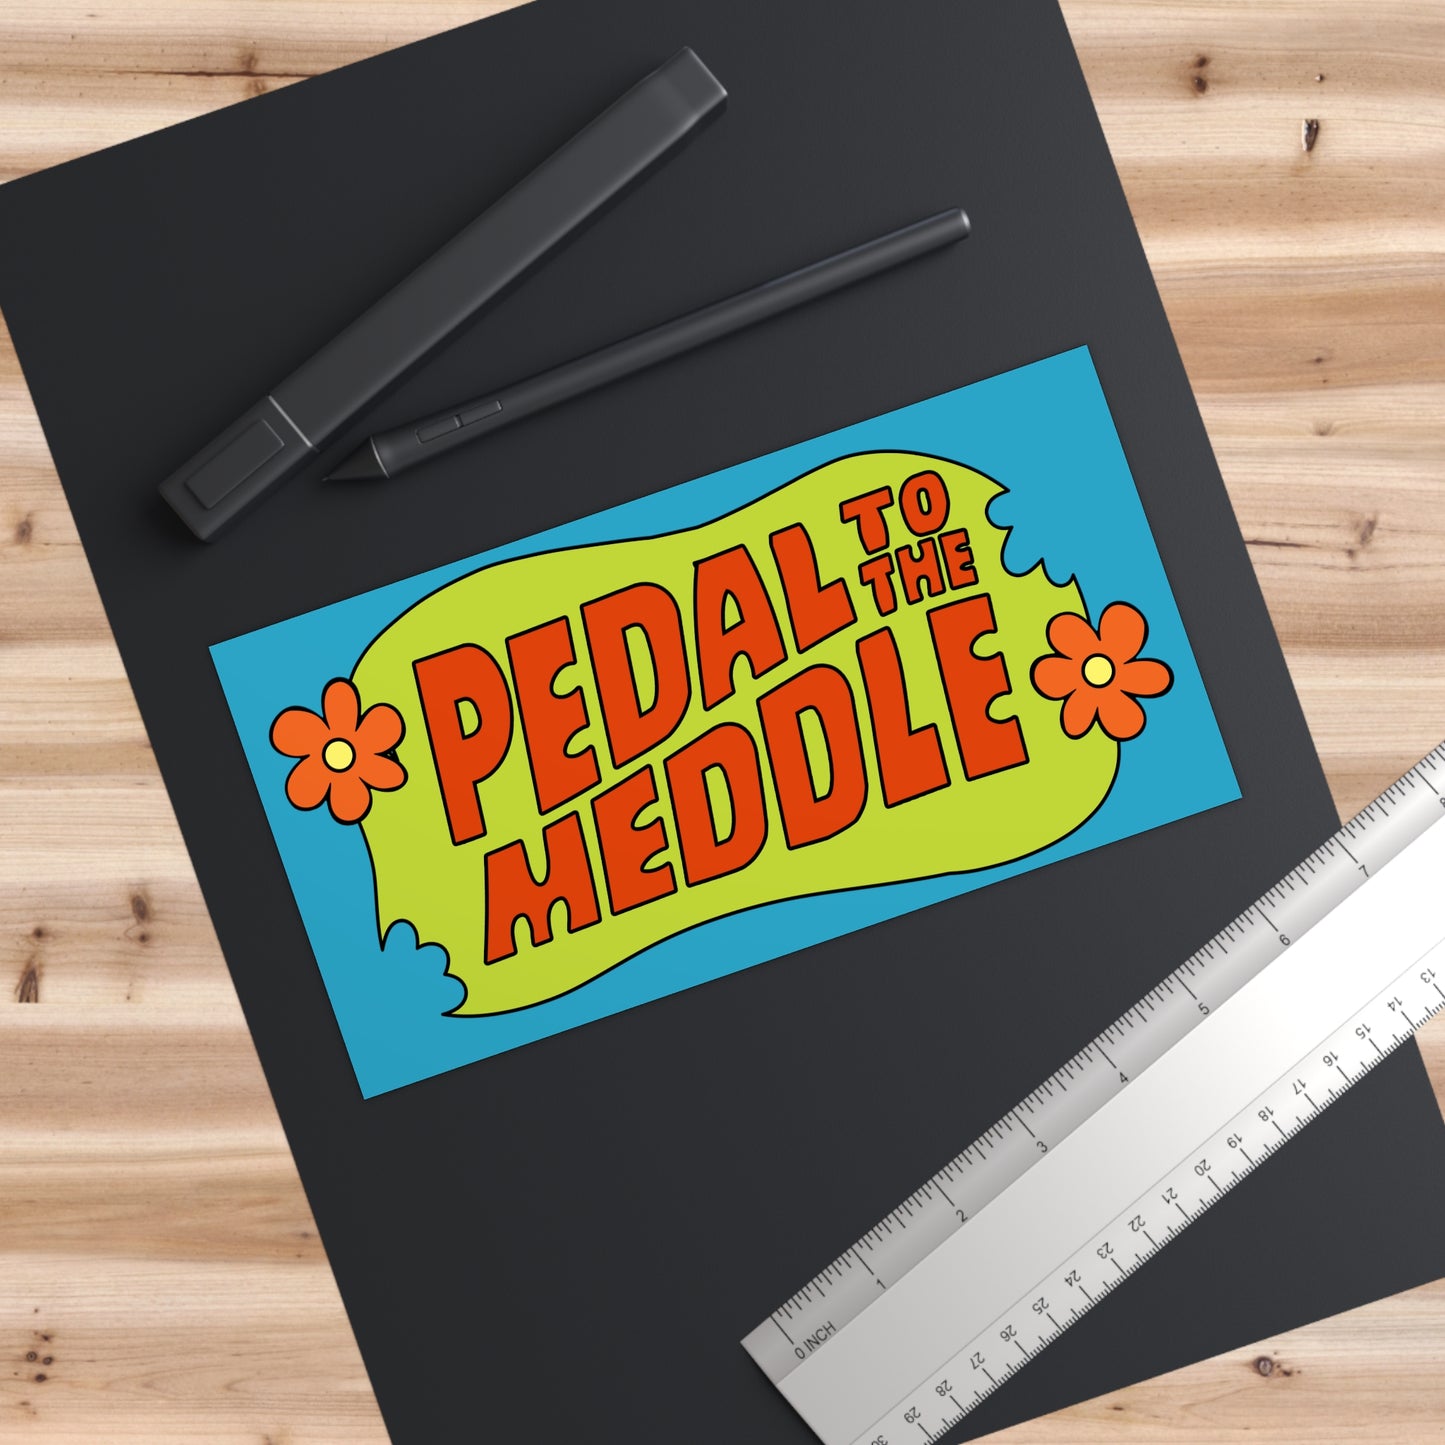 Pedal to the Meddle bumper sticker